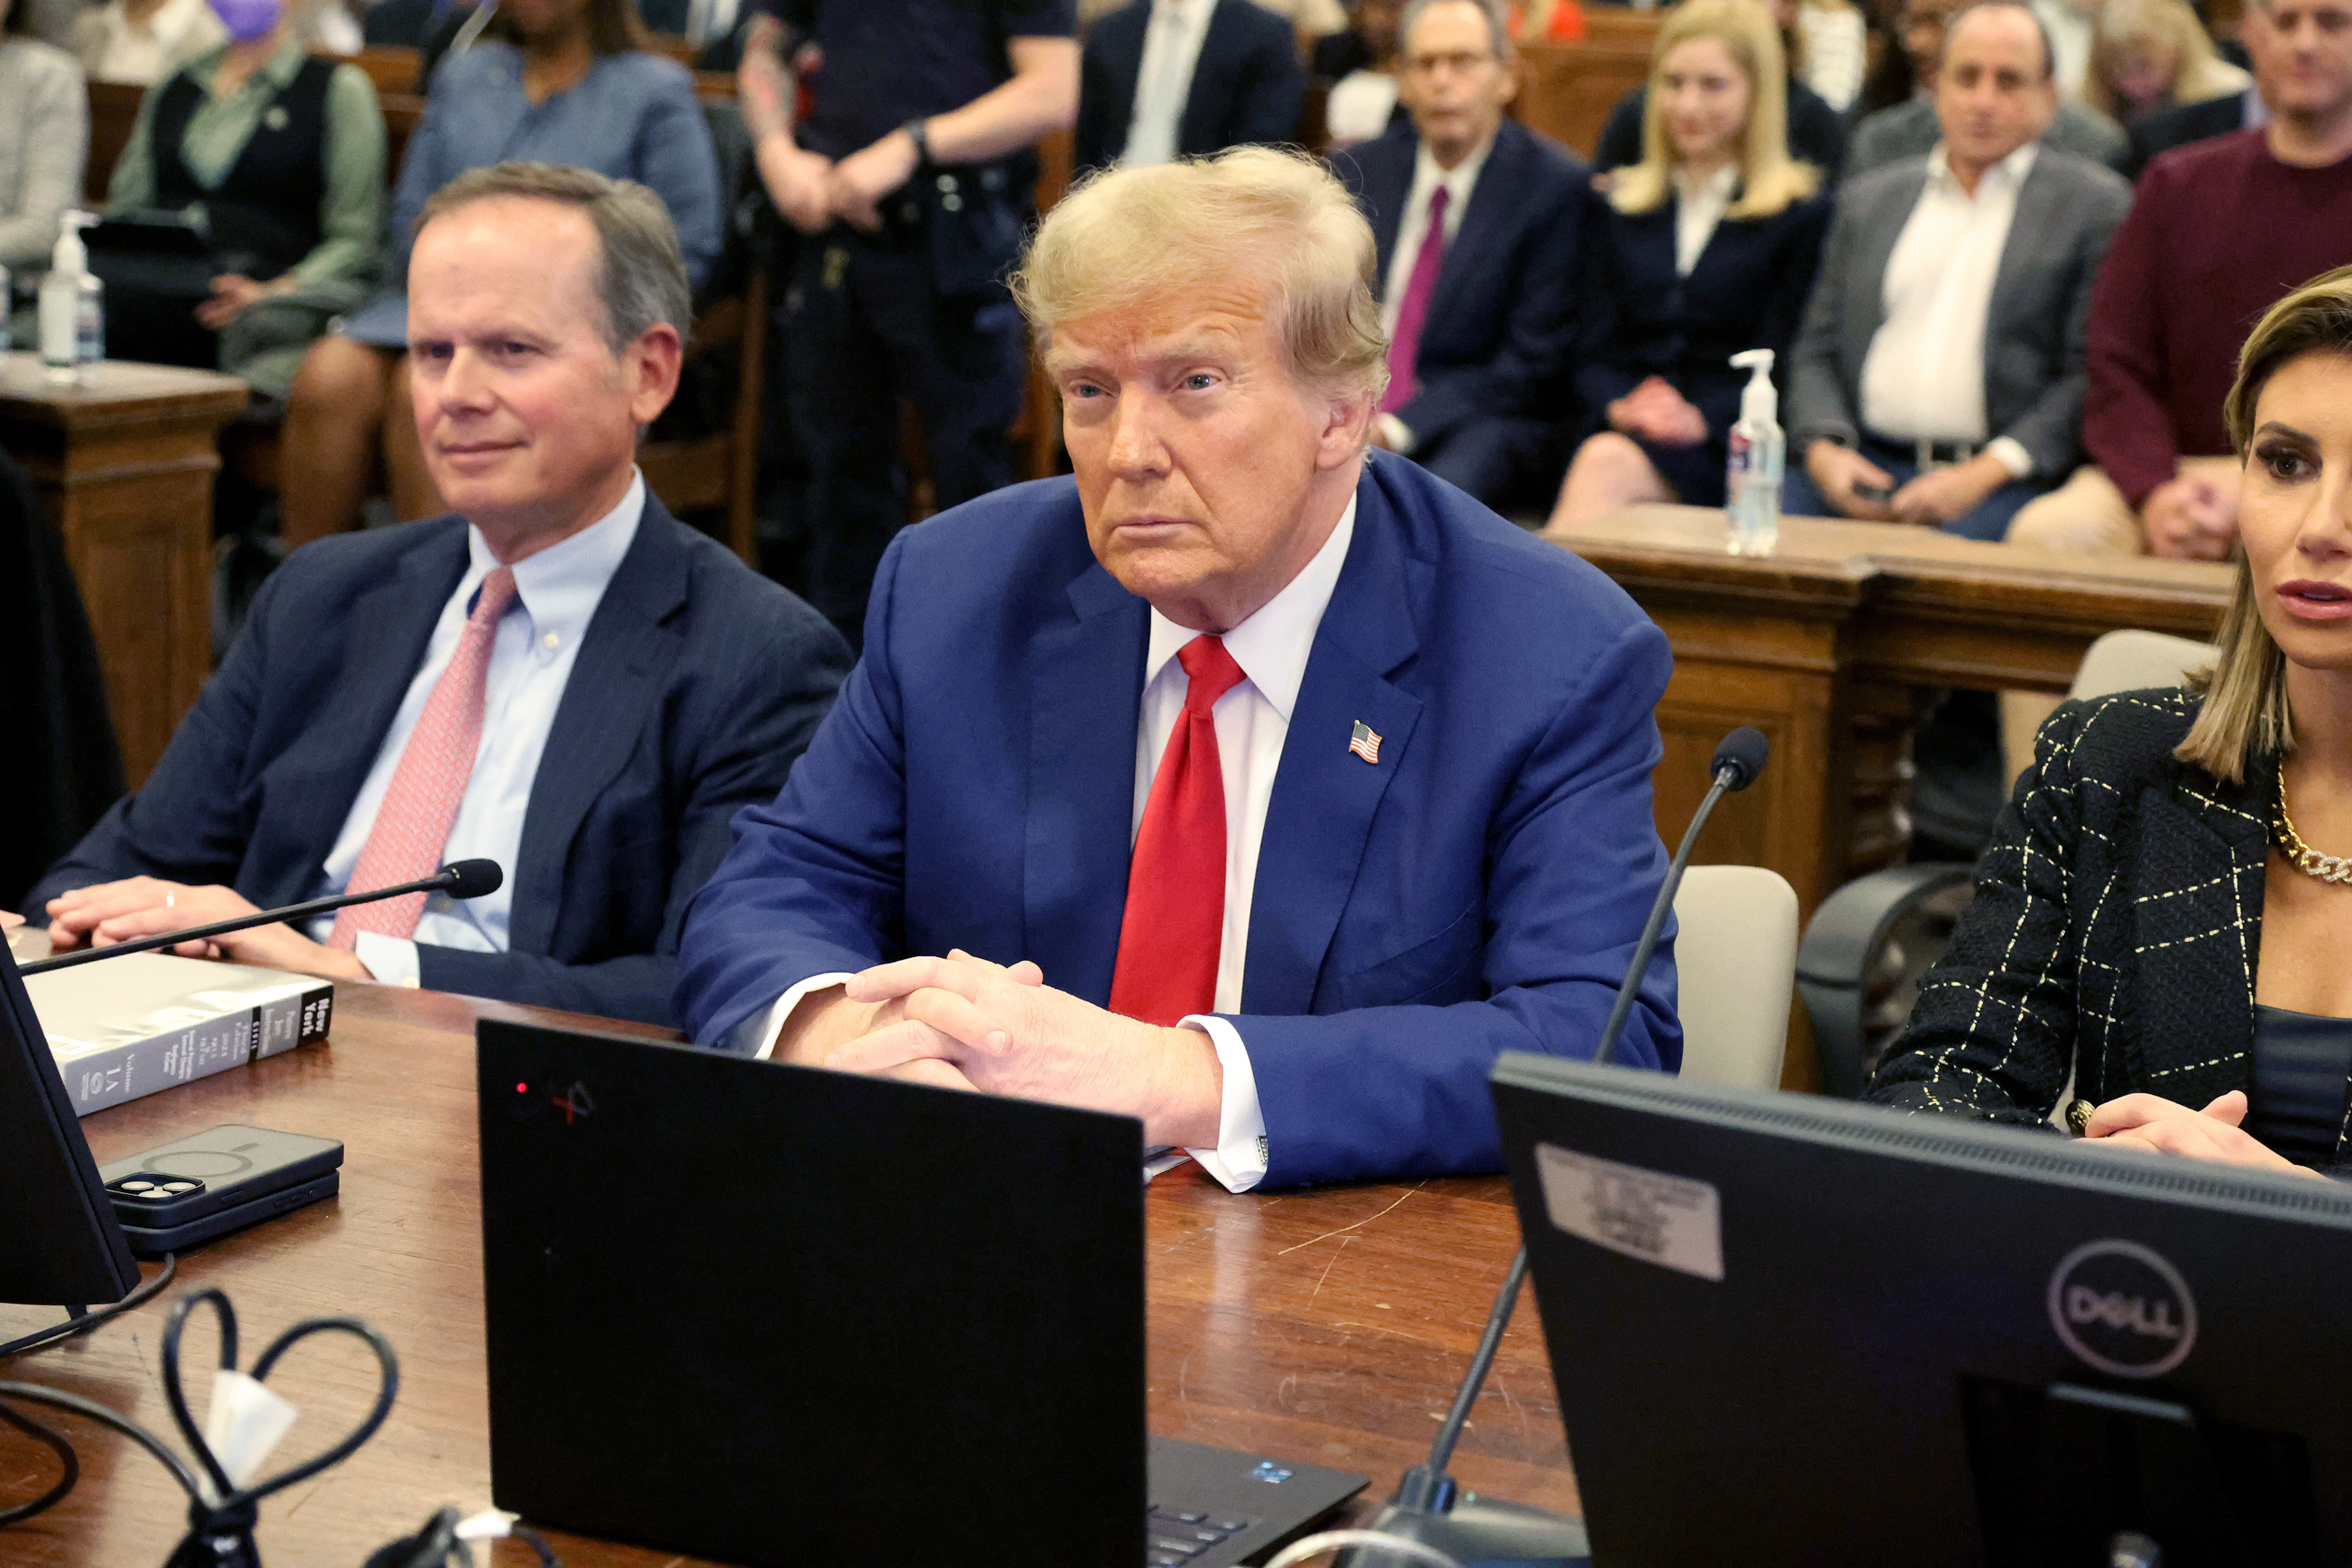 Three people seated at a table, the middle person is Donald Trump. There are onlookers in the background